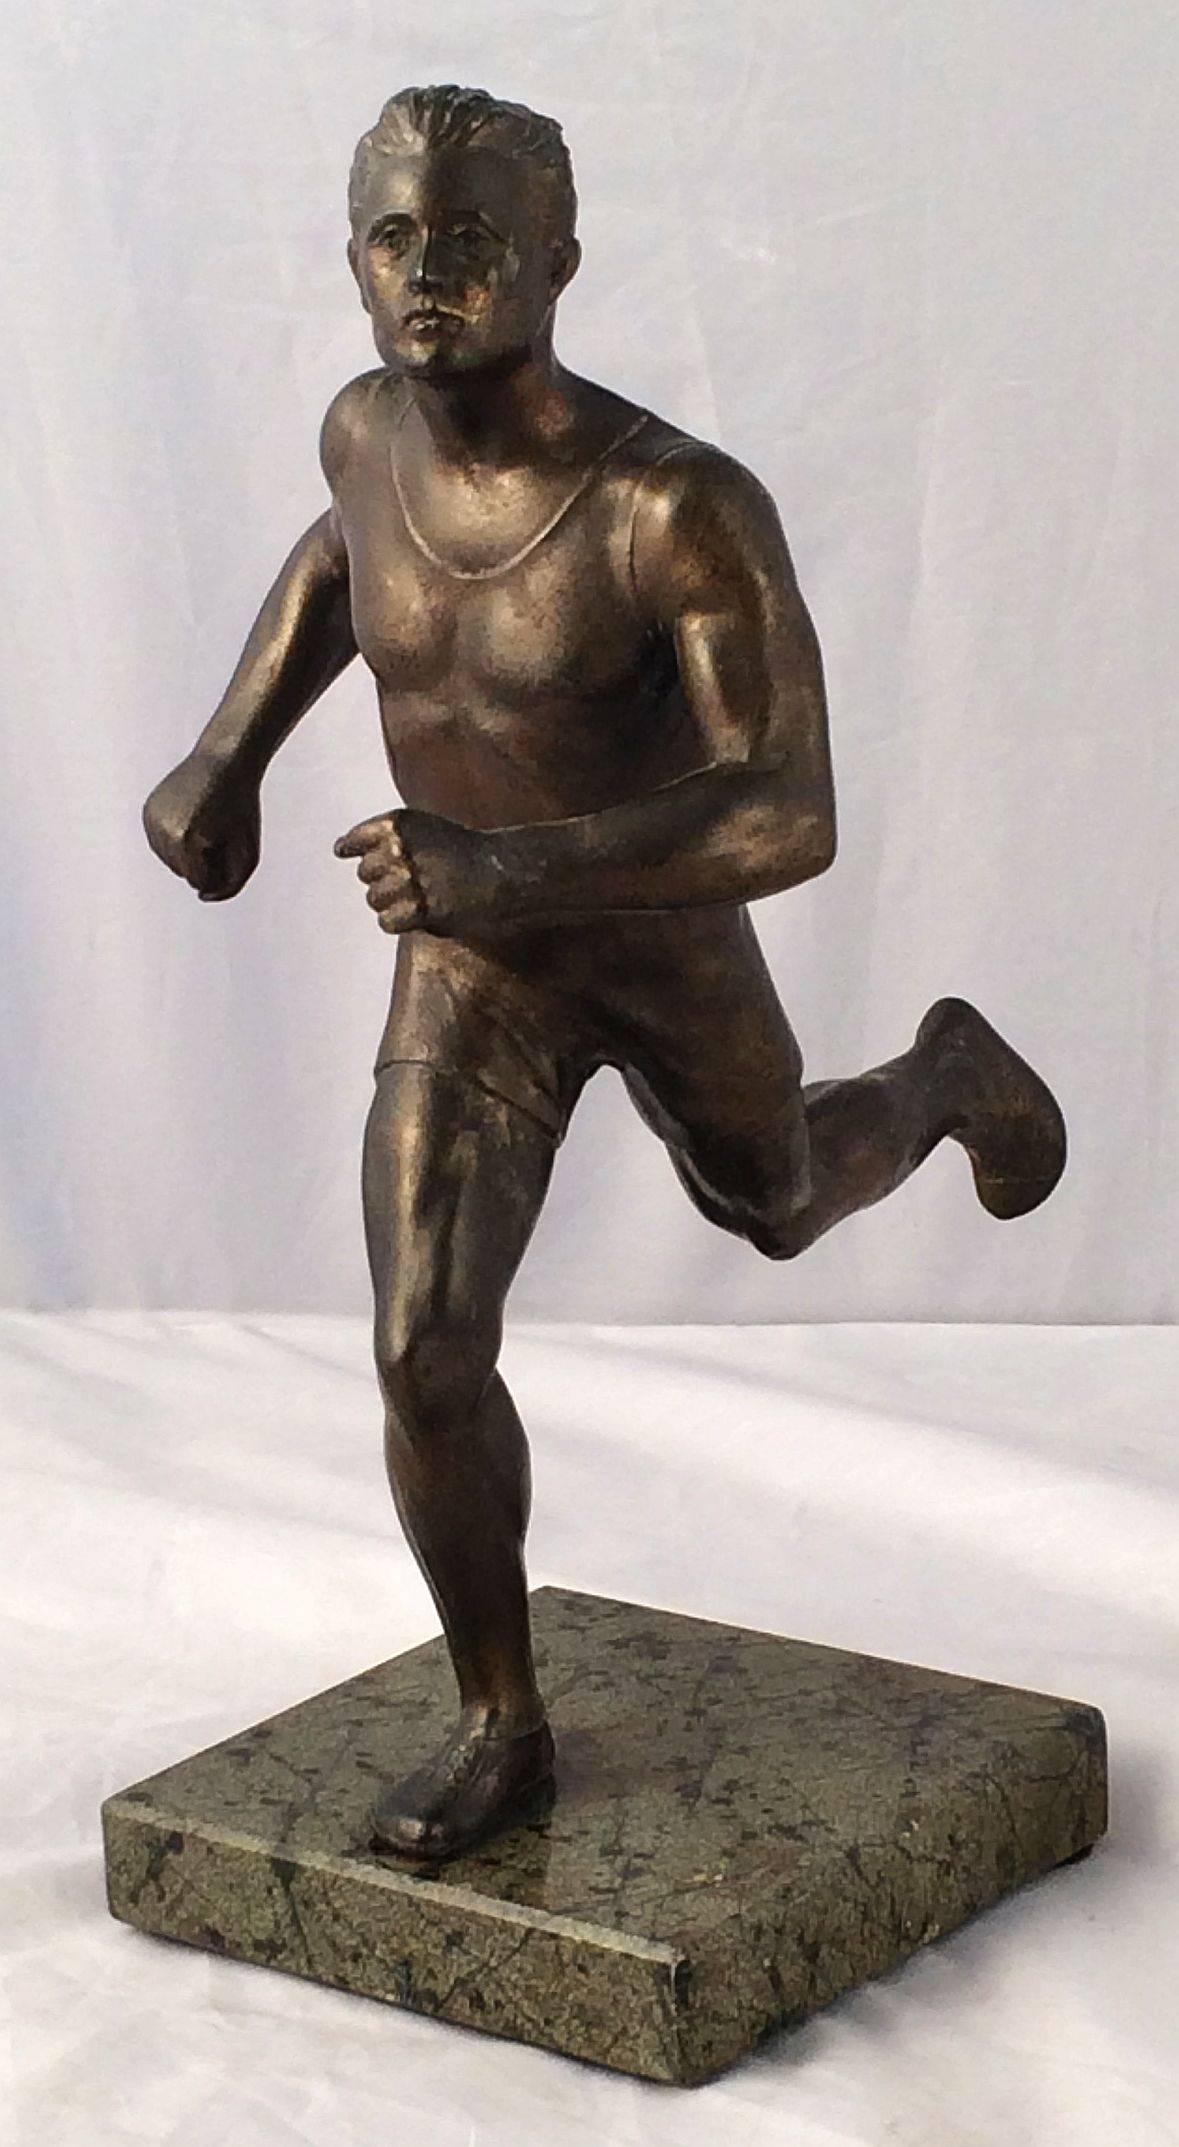 A fine German sports trophy featuring a sculptural figure of a marathon runner or sprinter mounted to a square marble base.

Makes a great gift for a decathlon or jogging enthusiast.